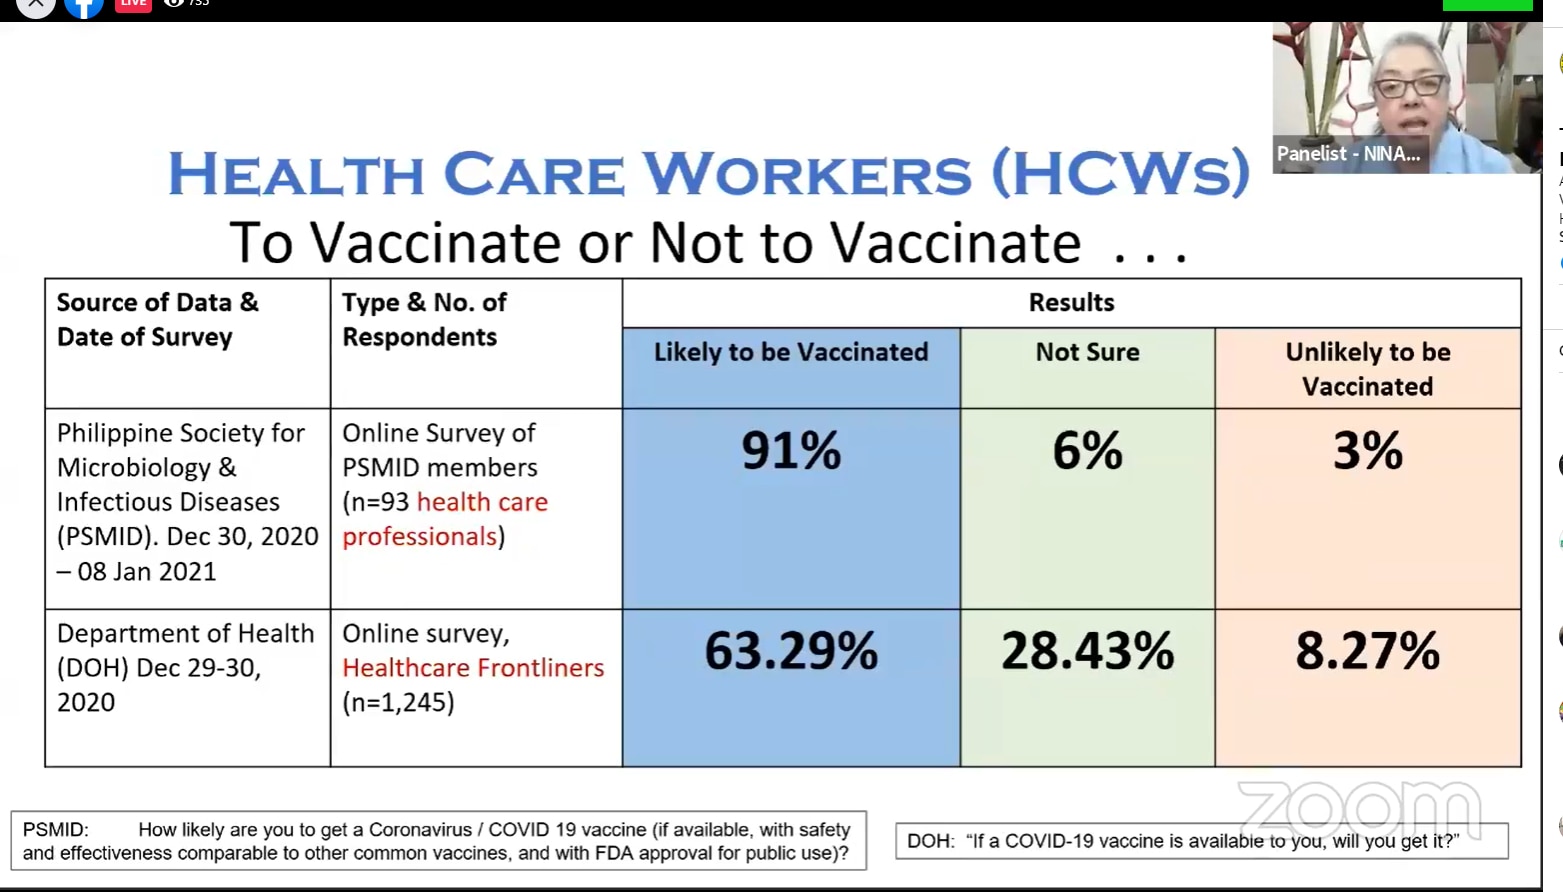 Some health workers wary of COVID-19 vaccine, but those in favor outnumber them - polls 2